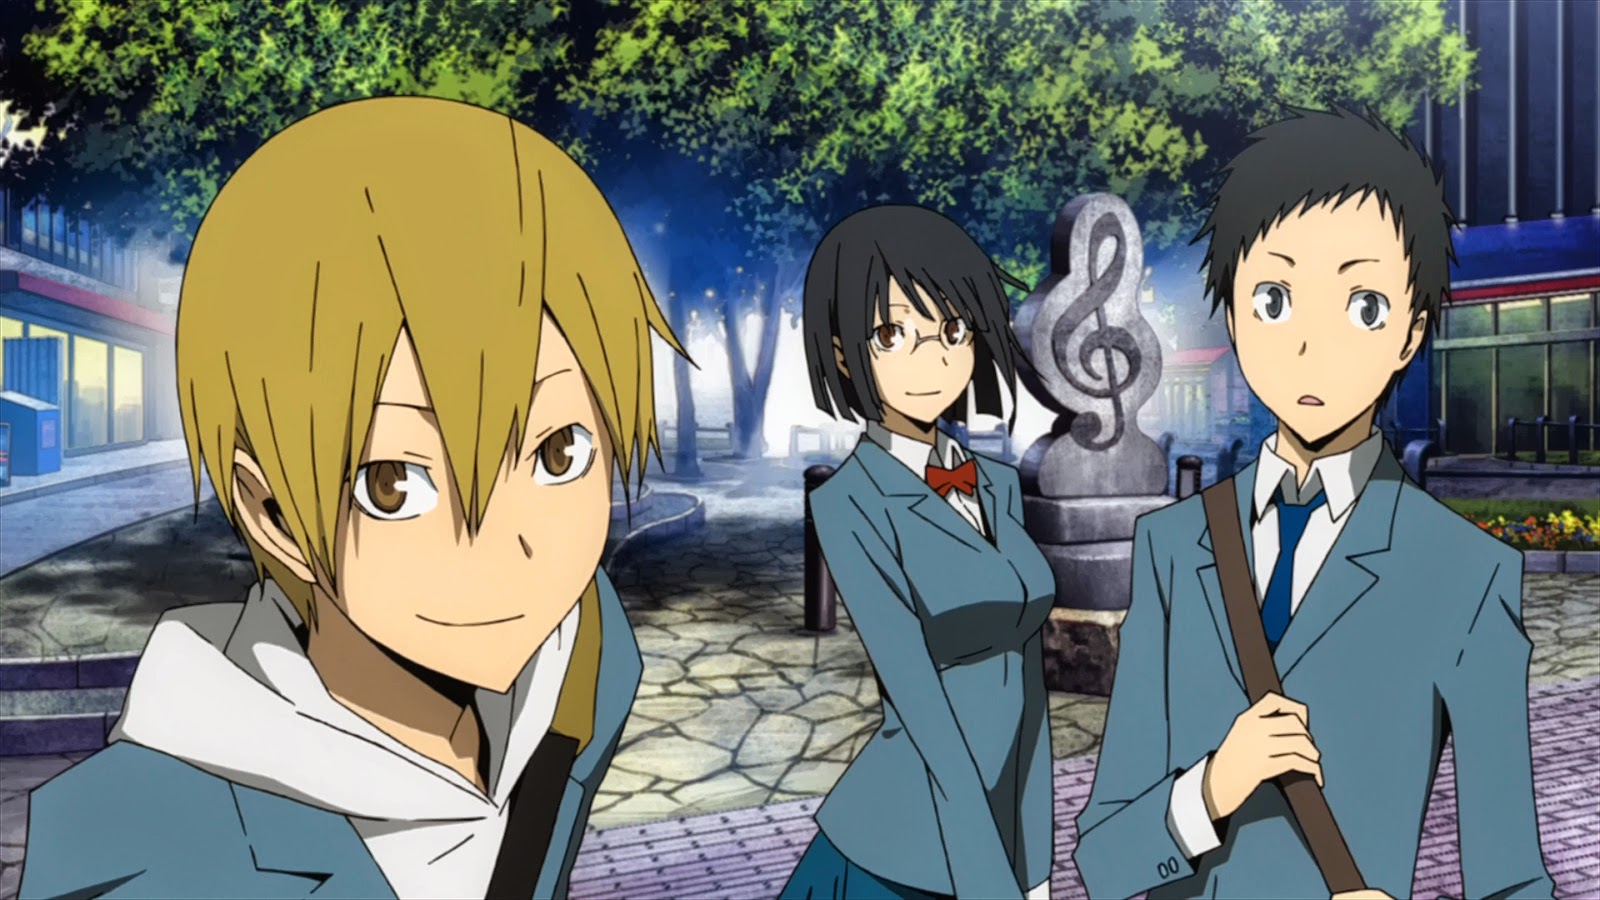 10,000 Anime Fans Voted for the Fictional Schools They Want to Study At haruhichan.com Raira Academy Durarara